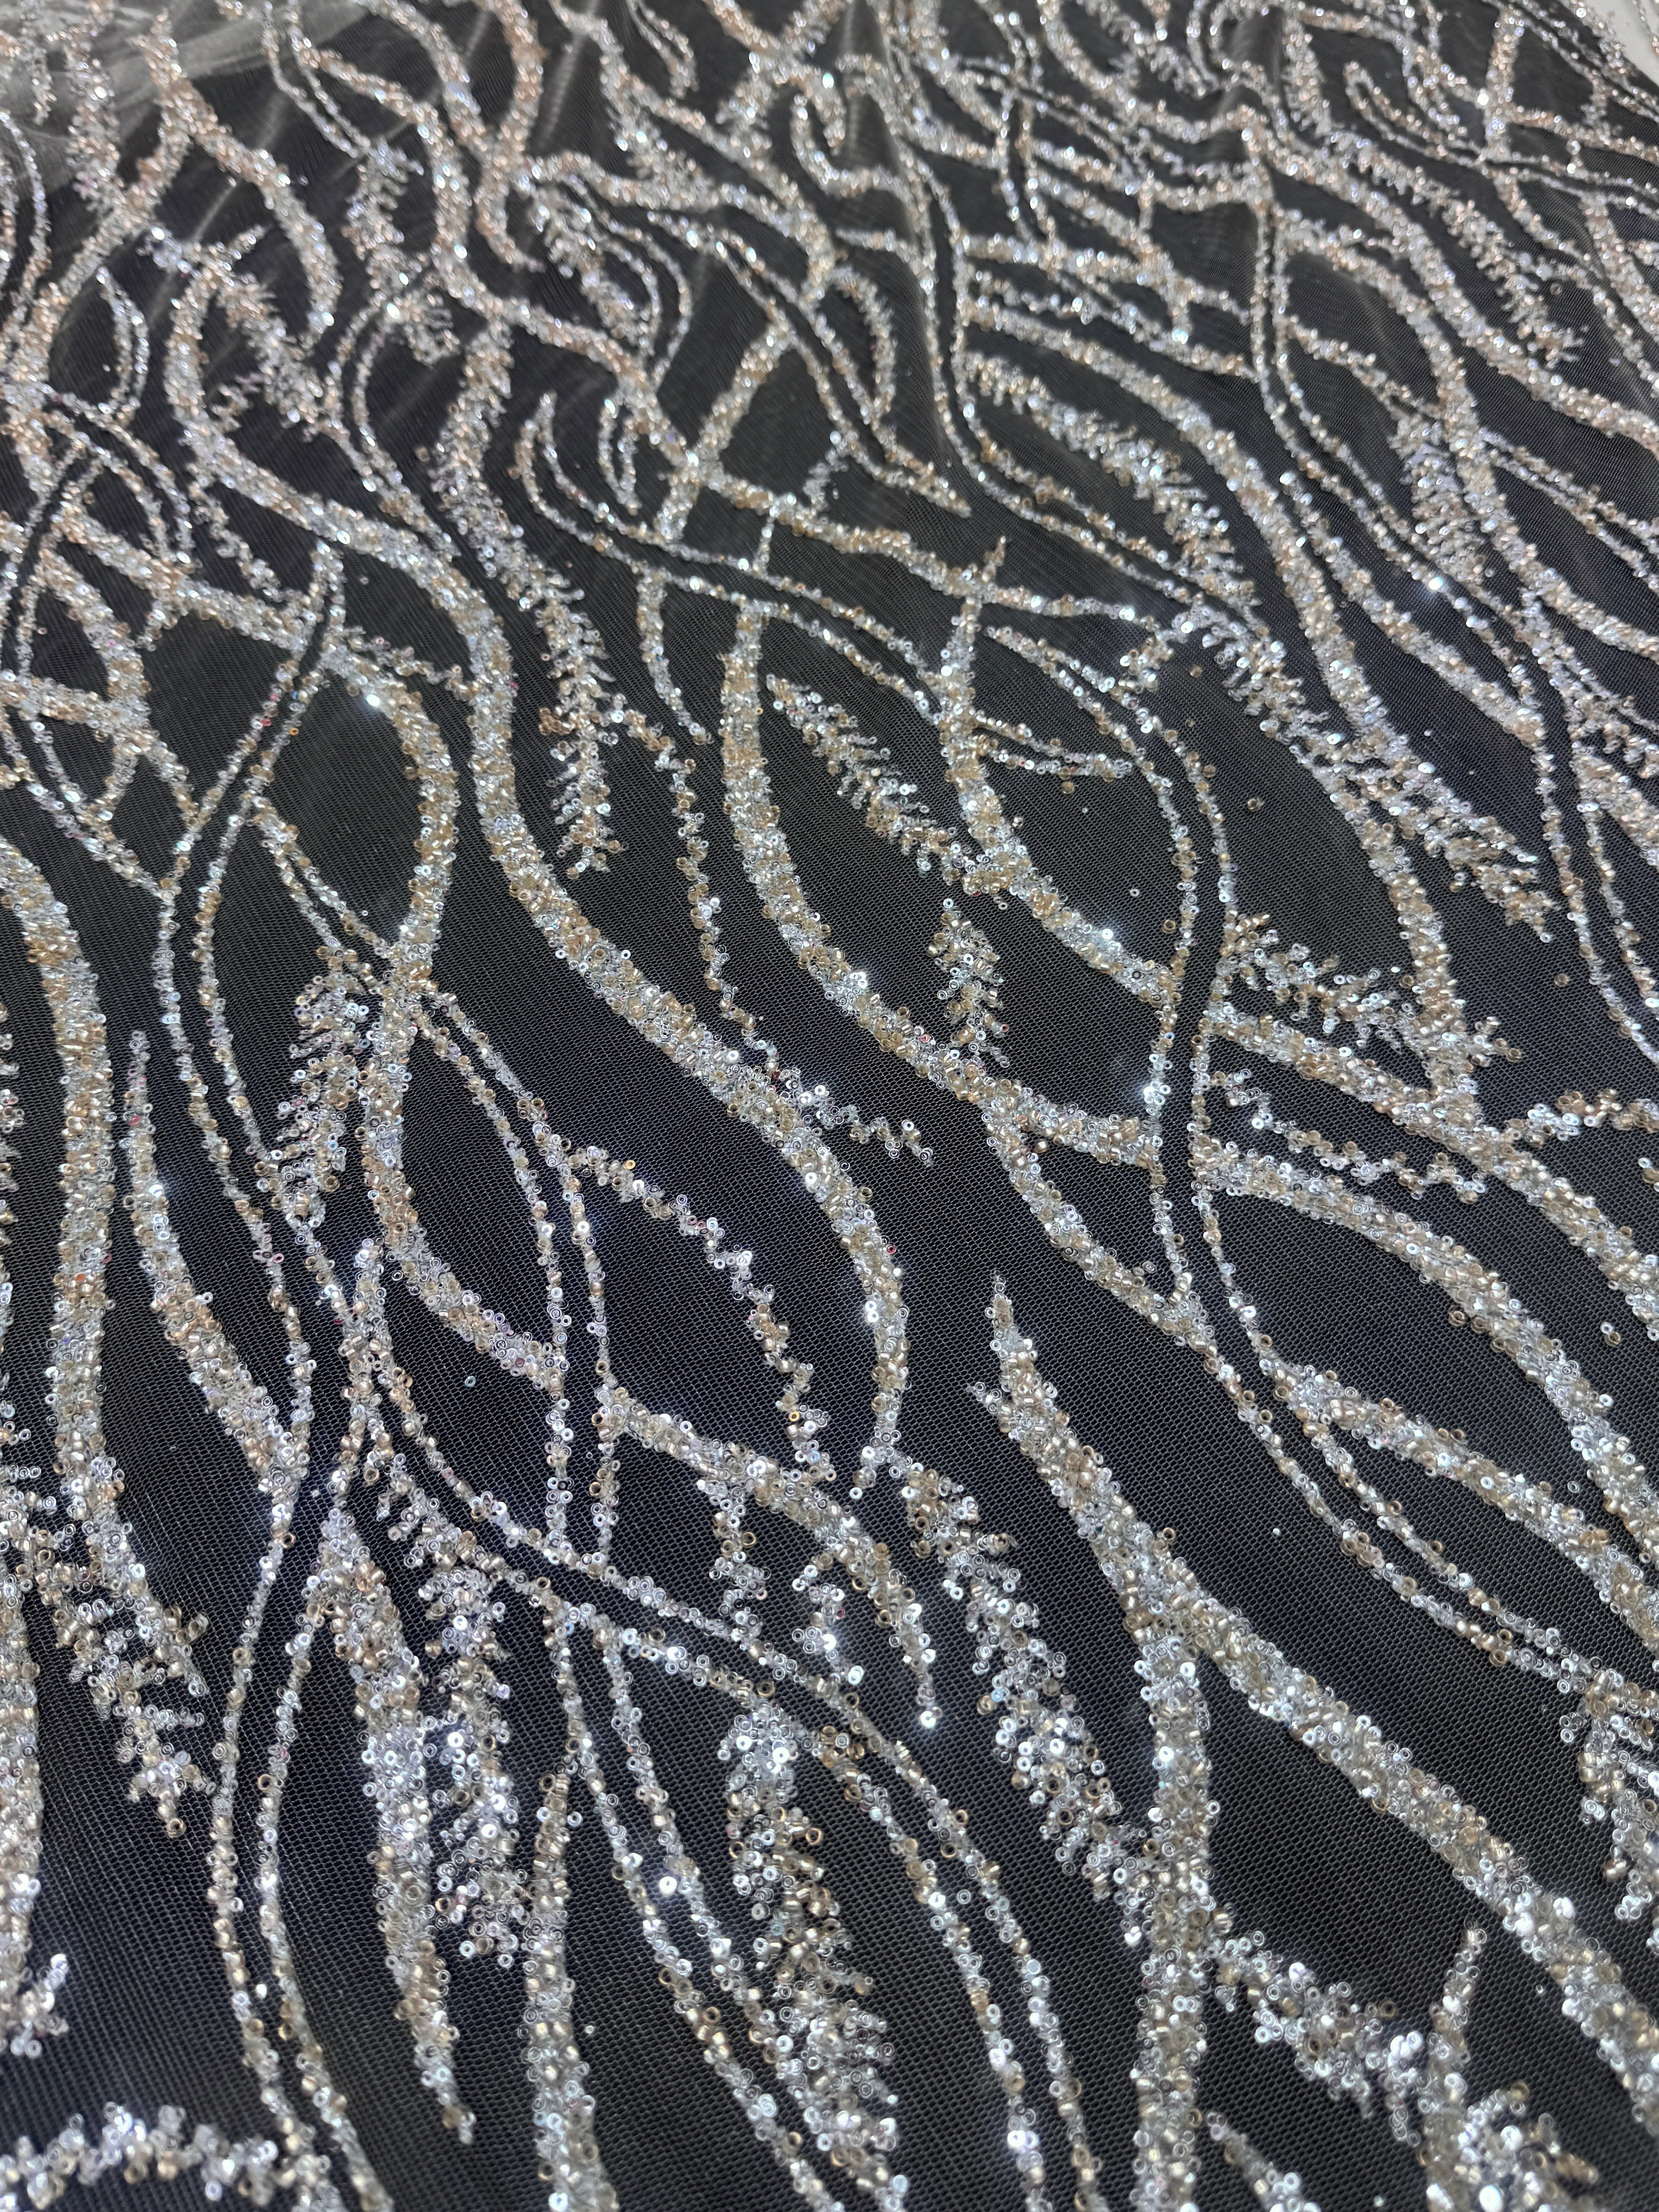 Gold Silver Wave Design Glitter Lace Mesh, online textile store, sewing, fabric store, sewing store, cheap fabric store, kiki textiles